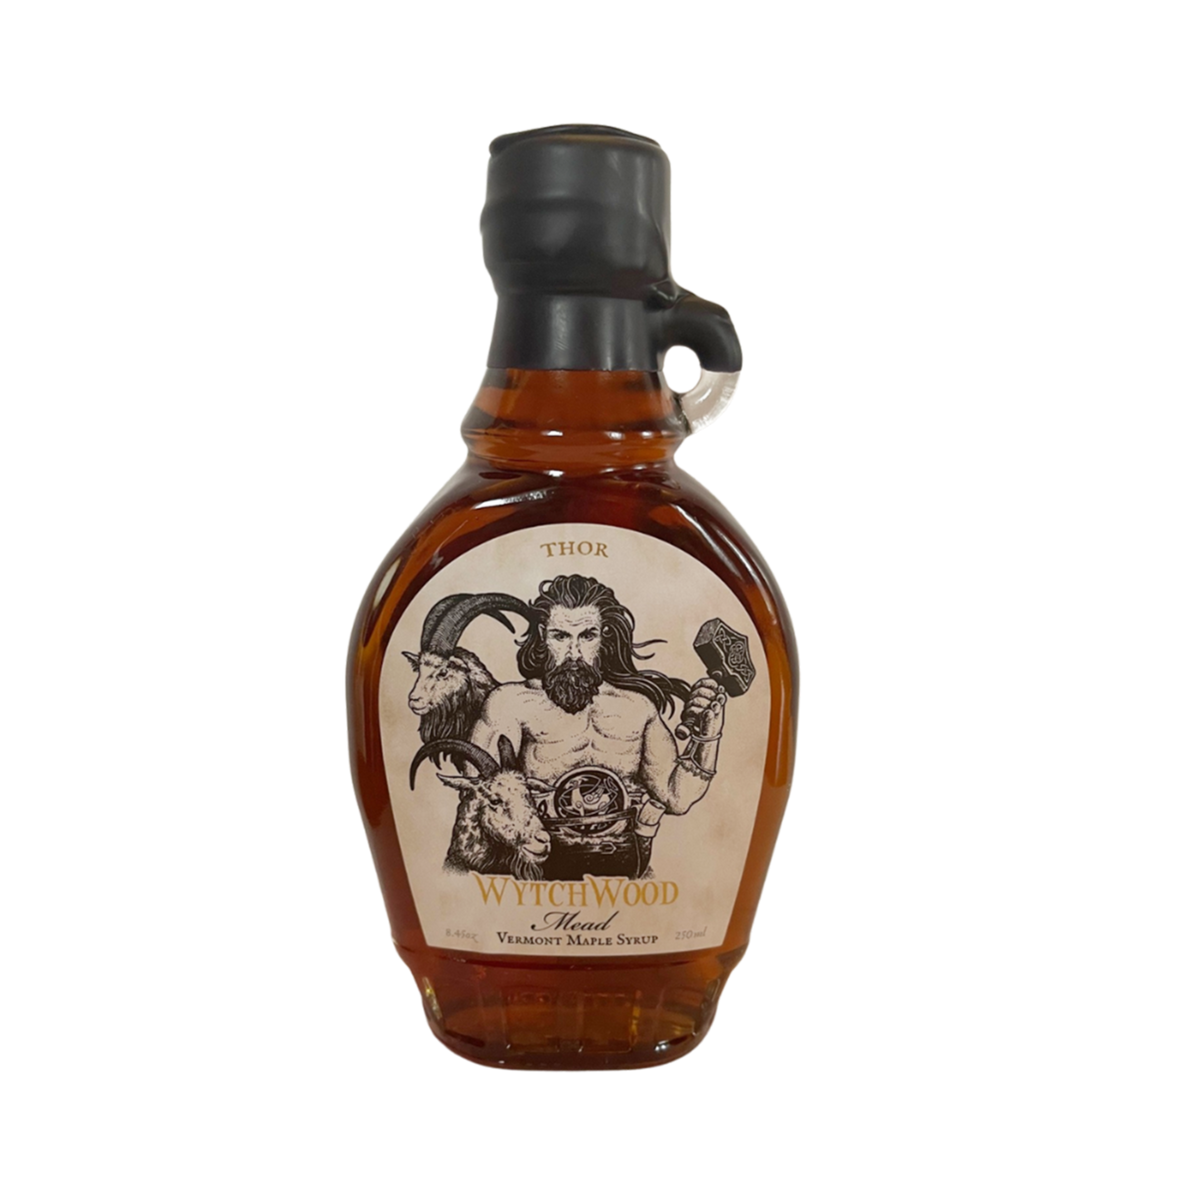 Thor: Mead Maple Syrup